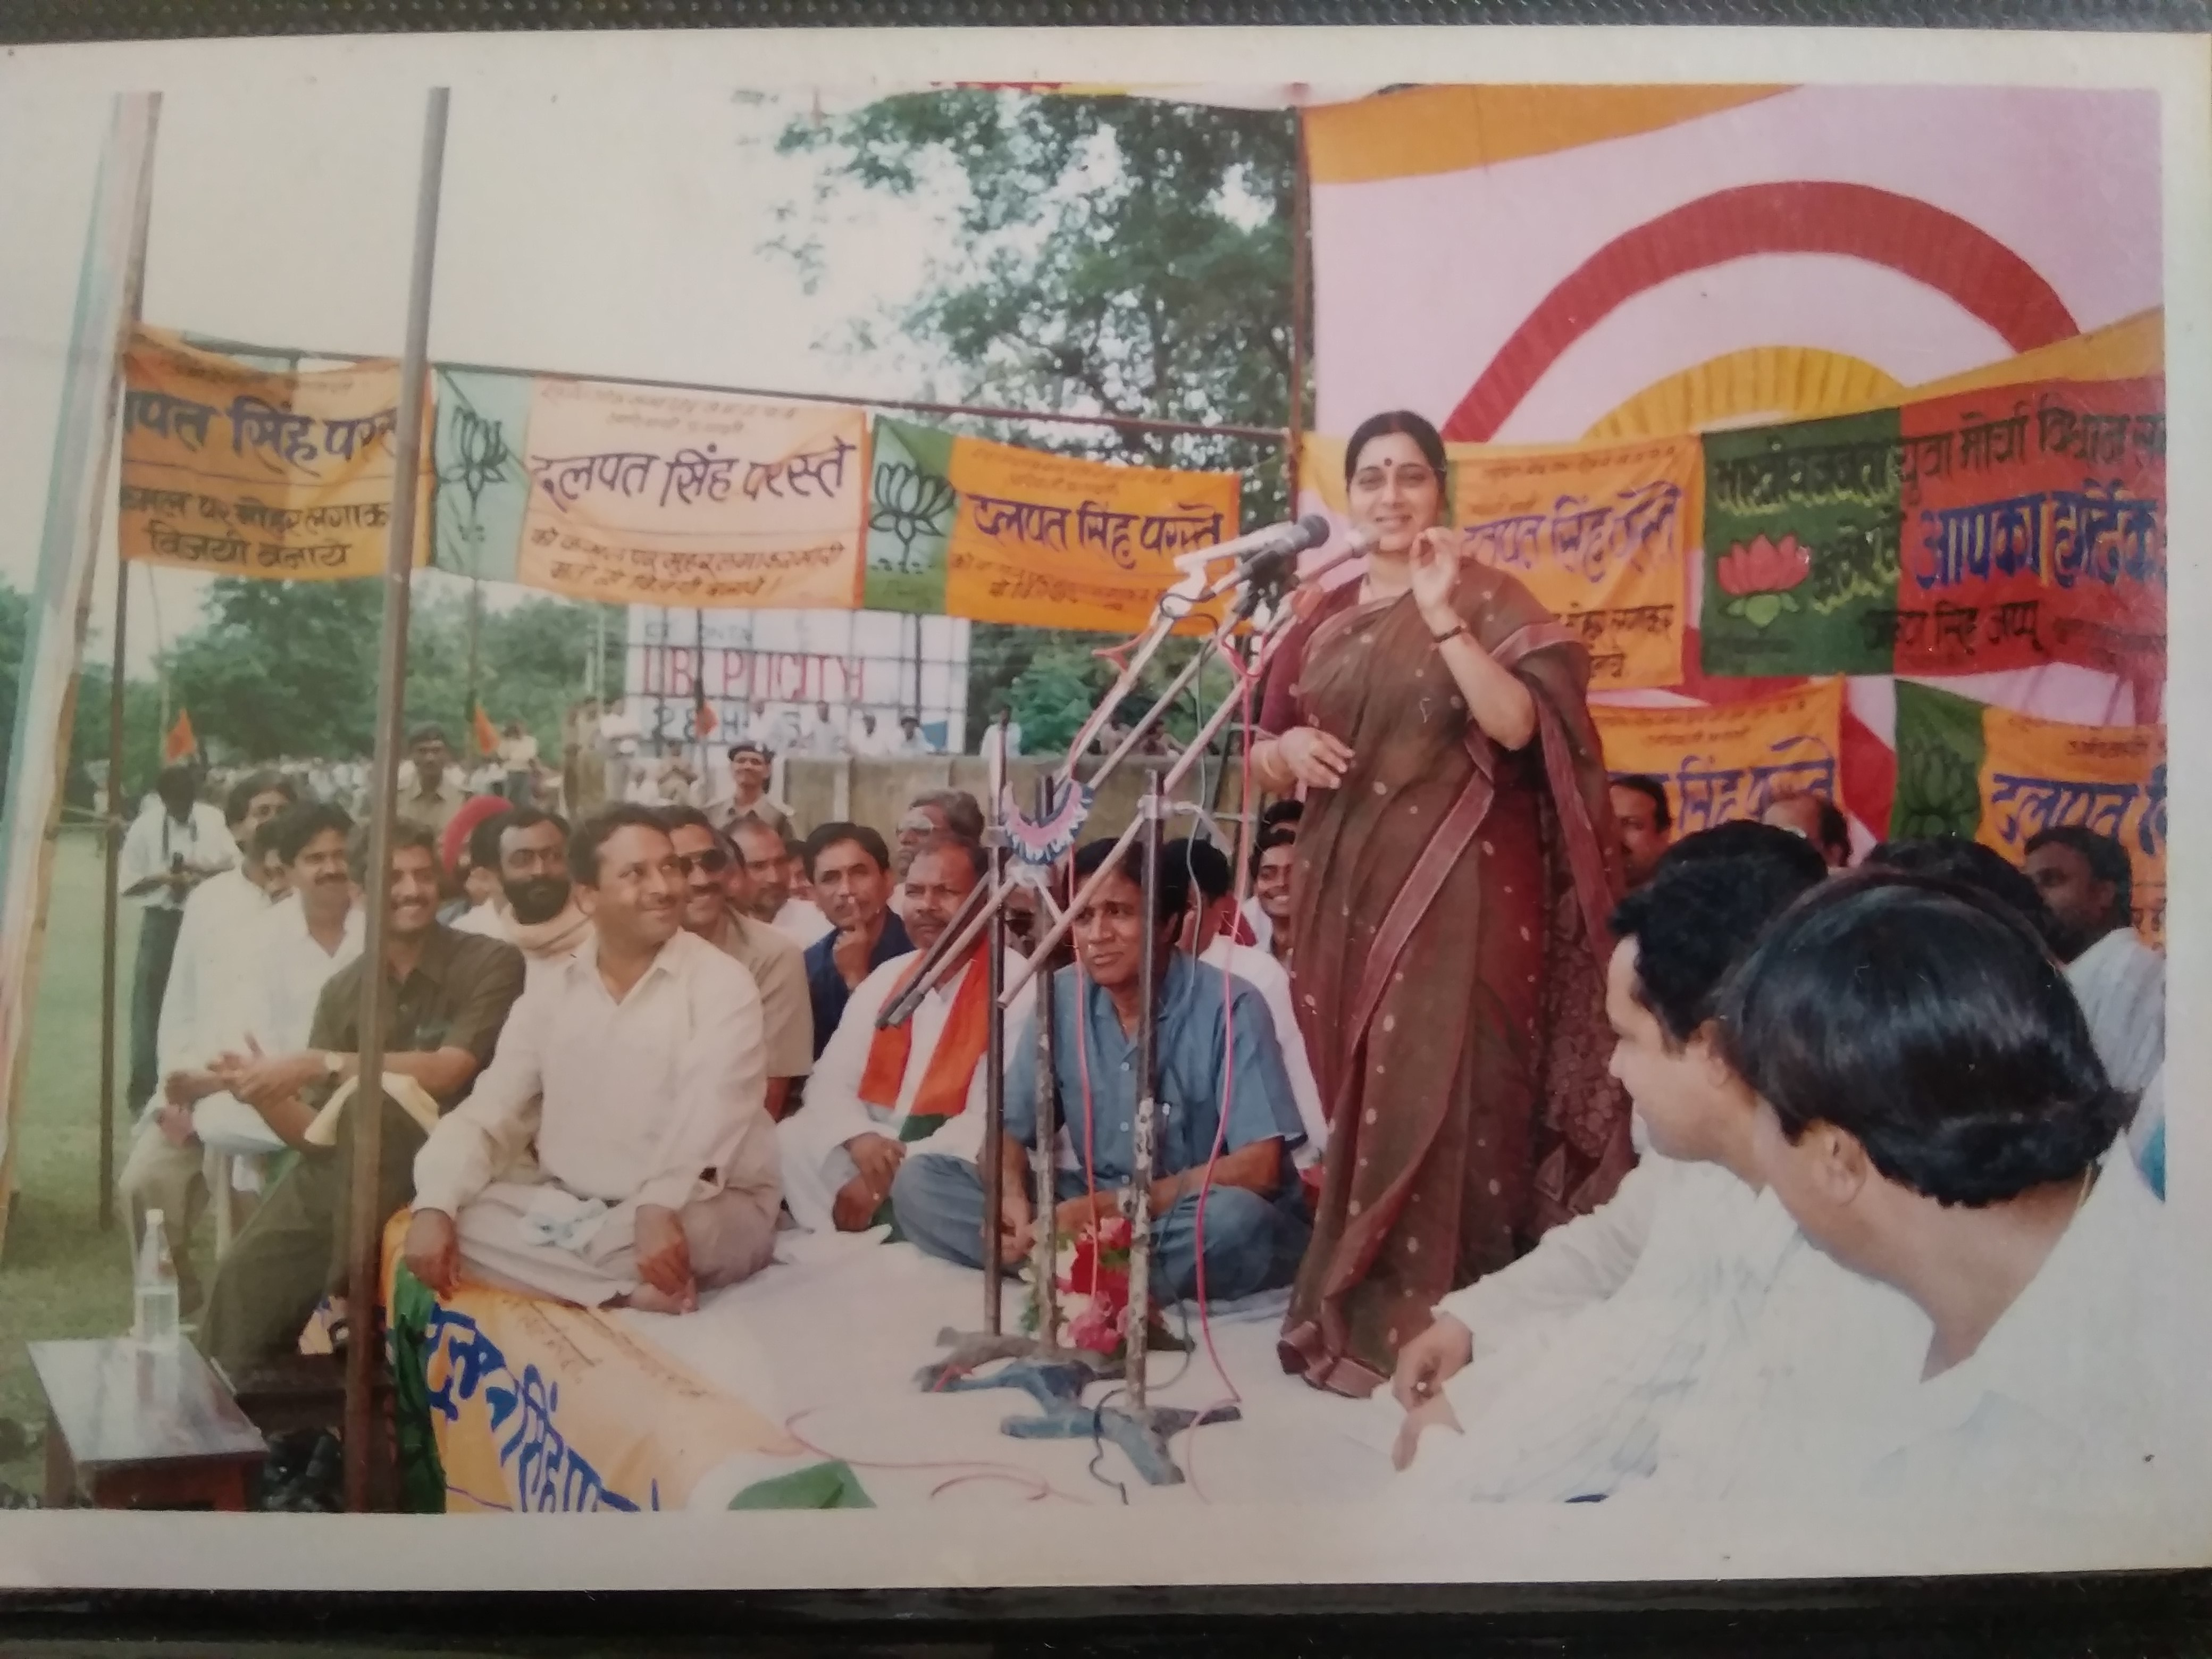 Sushma told the BJP candidate on the stage that sitting with me will n